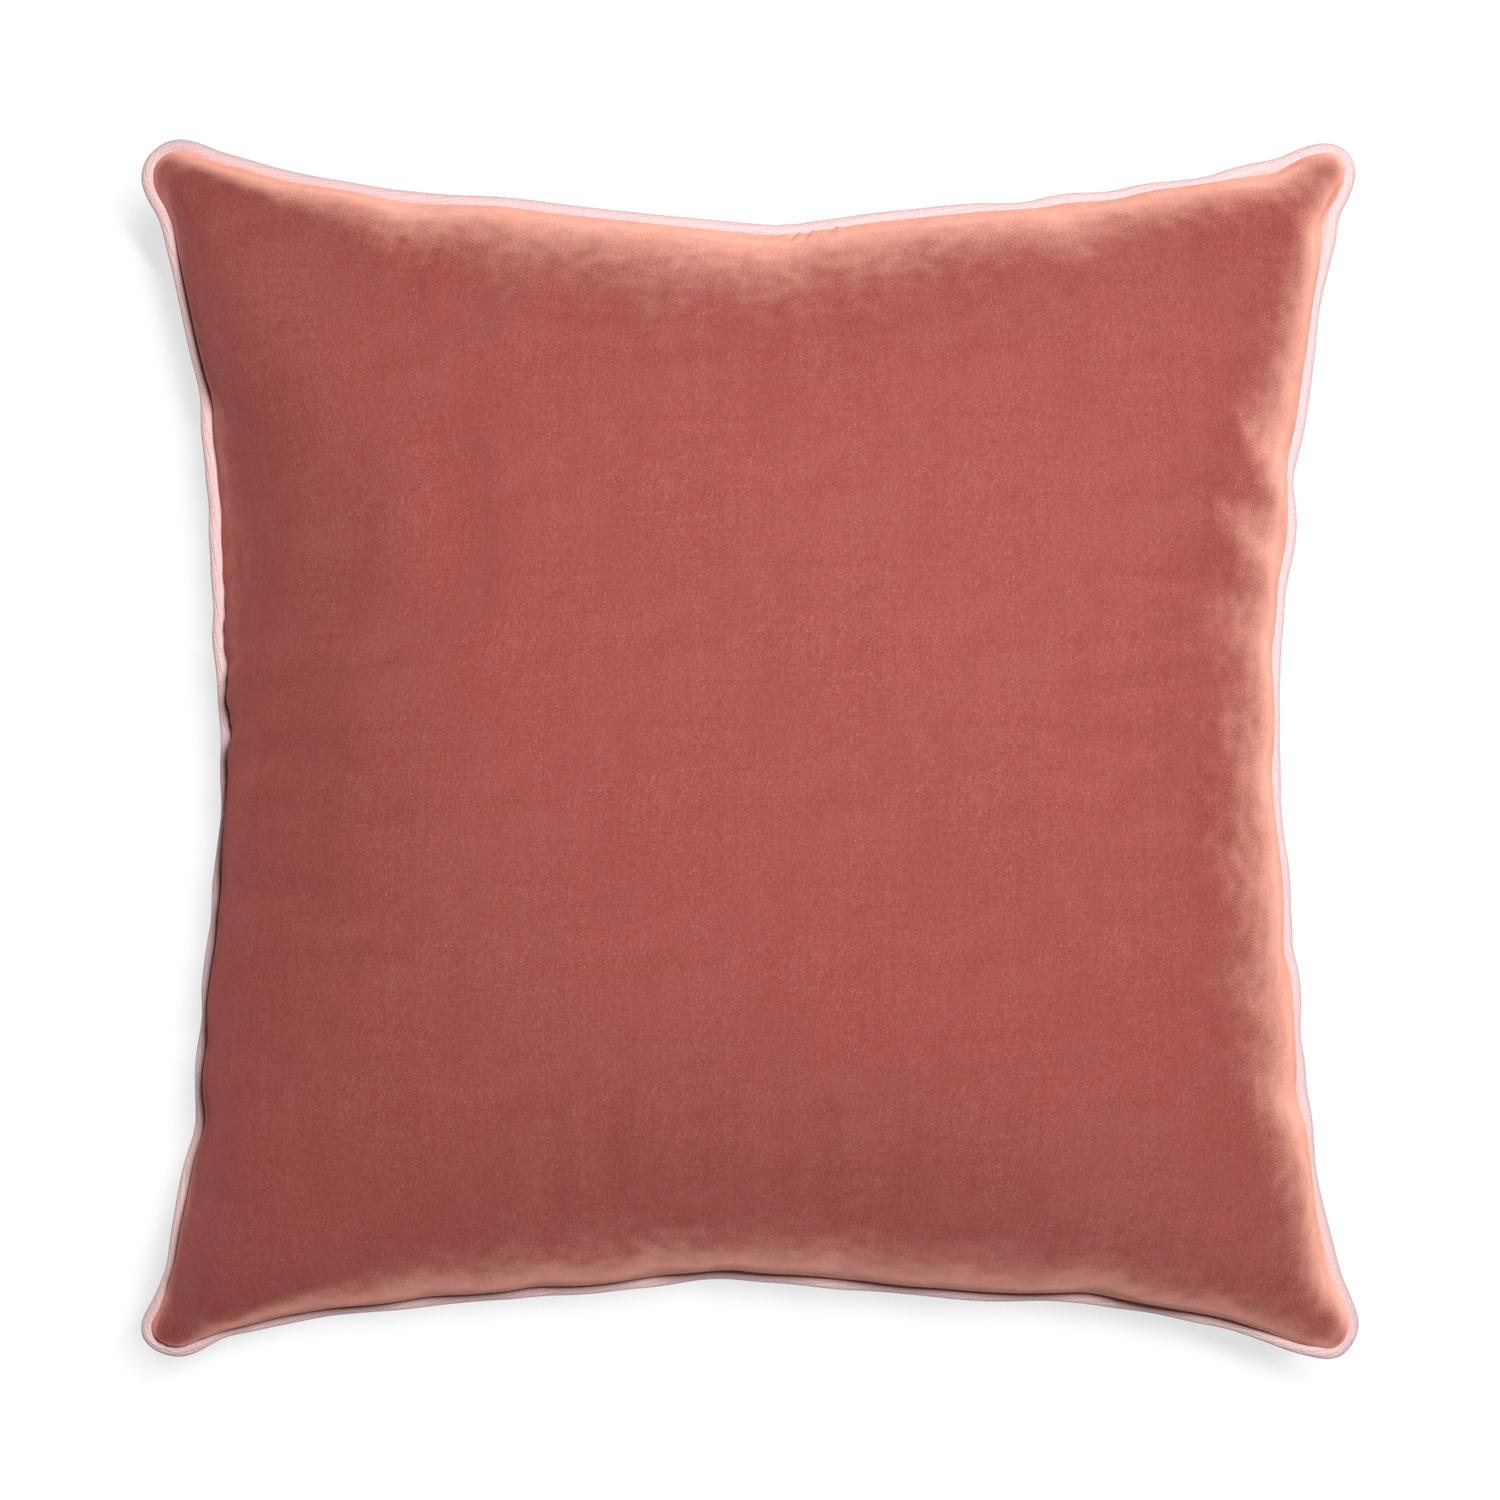 square coral velvet pillow with light pink piping